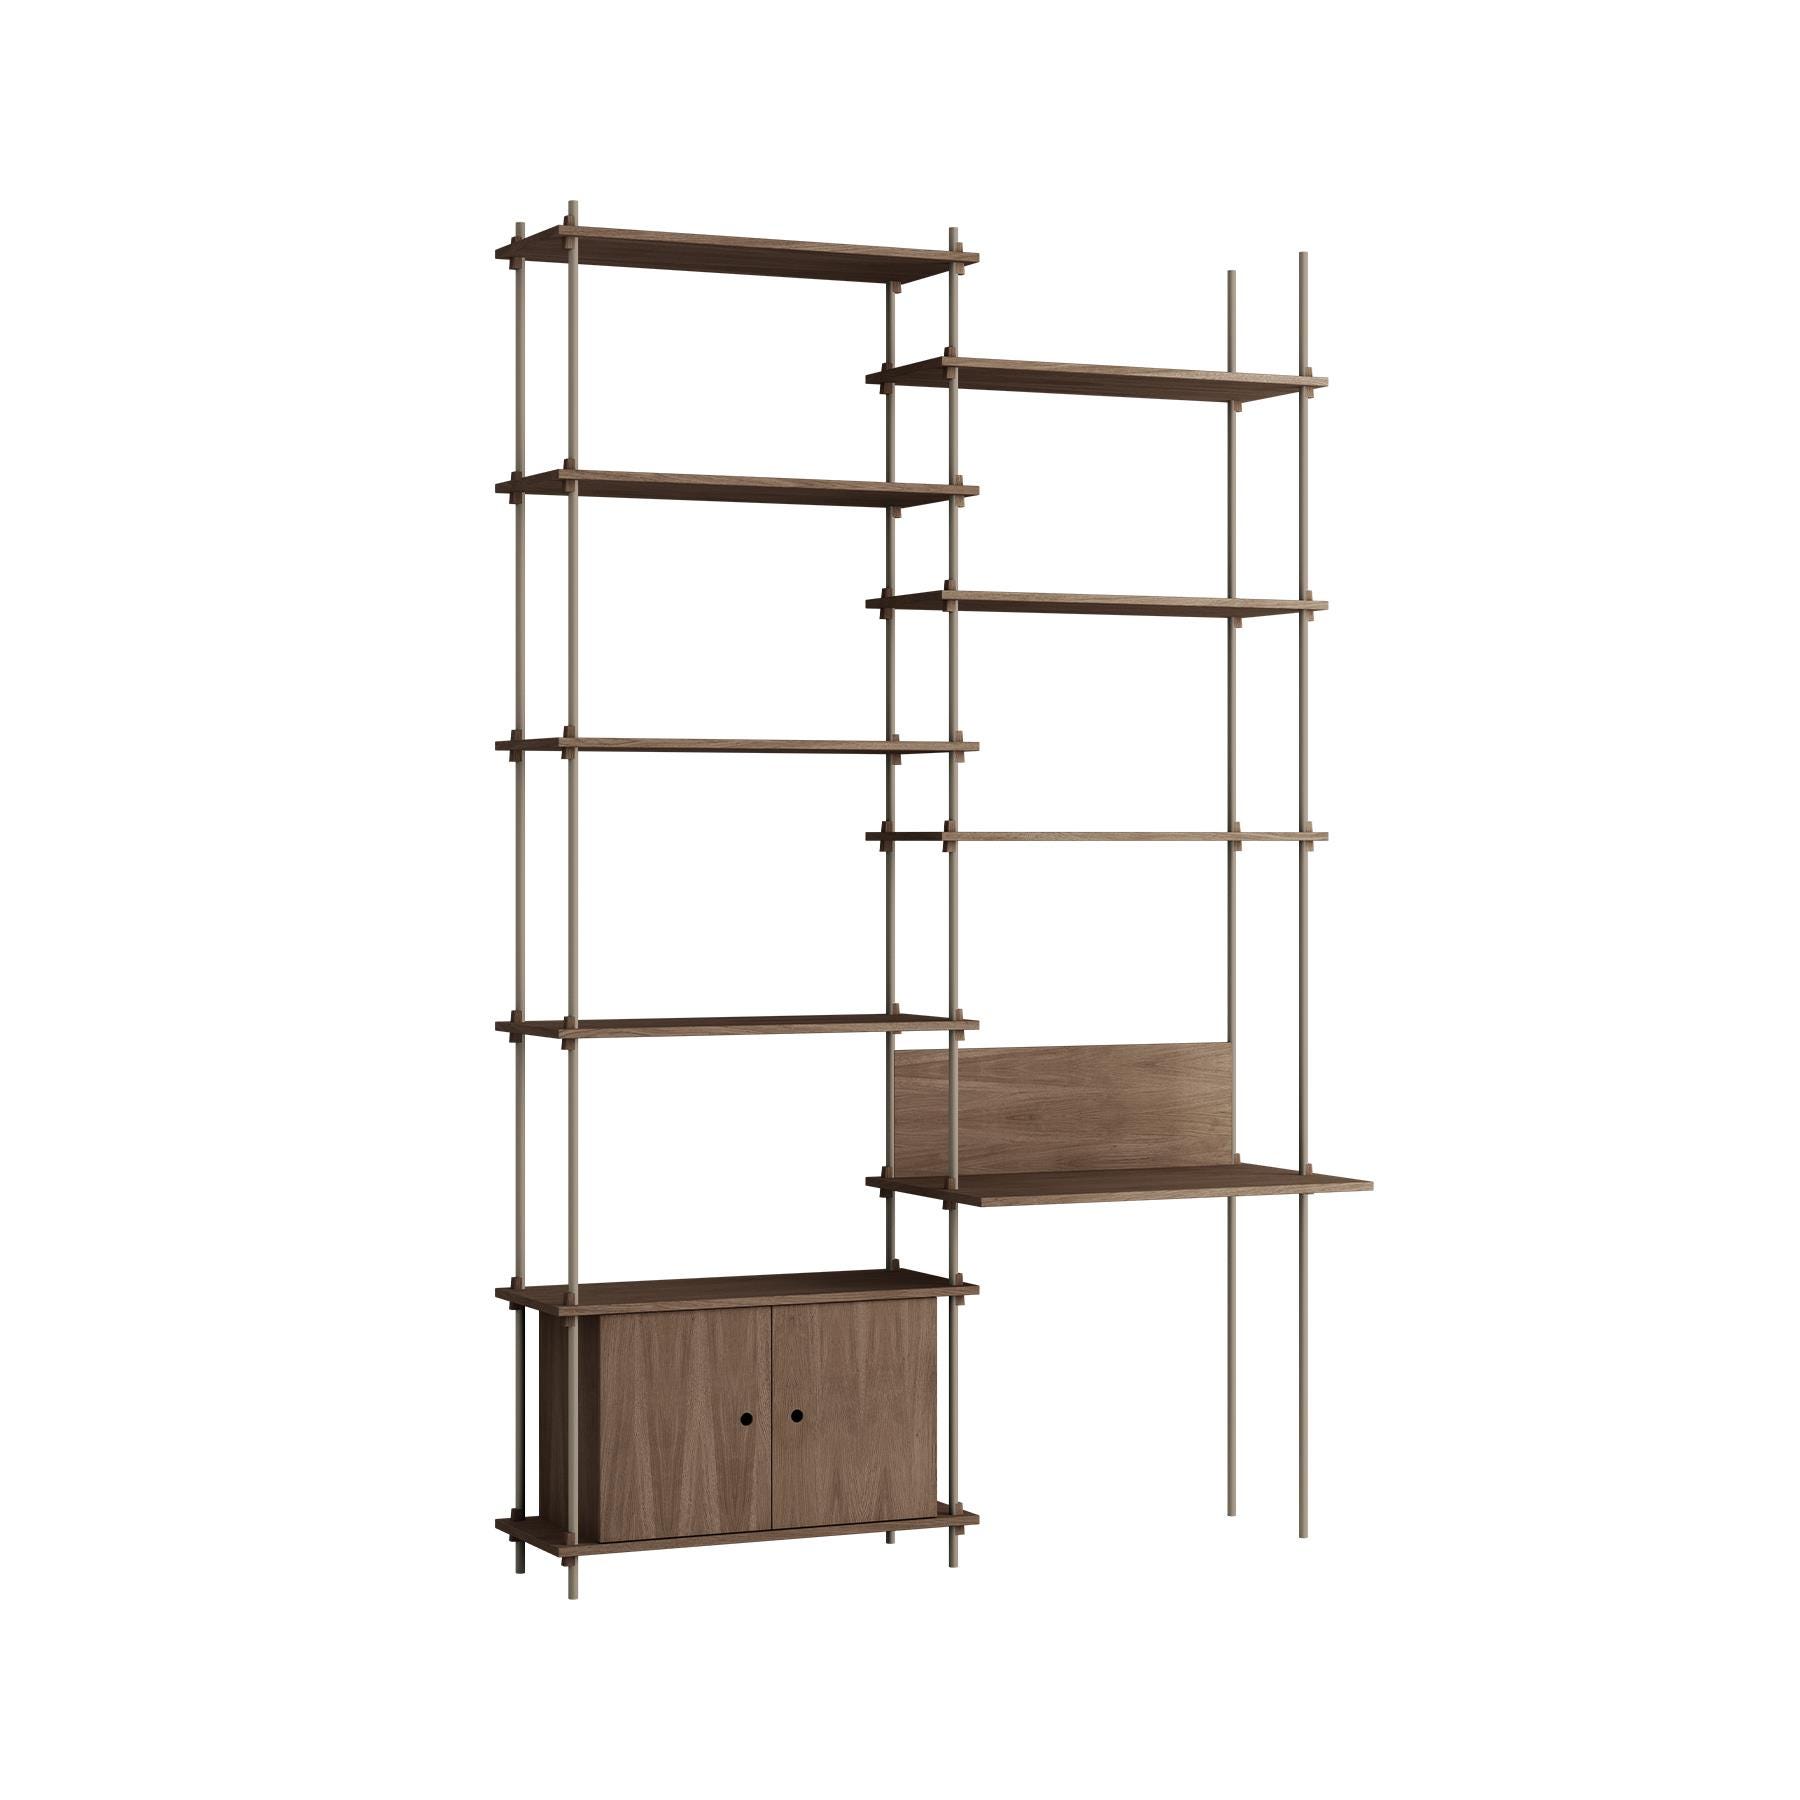 Moebe Double Shelving System With Desk And Cabinet Smoked Oak Warm Grey Dark Wood Designer Furniture From Holloways Of Ludlow